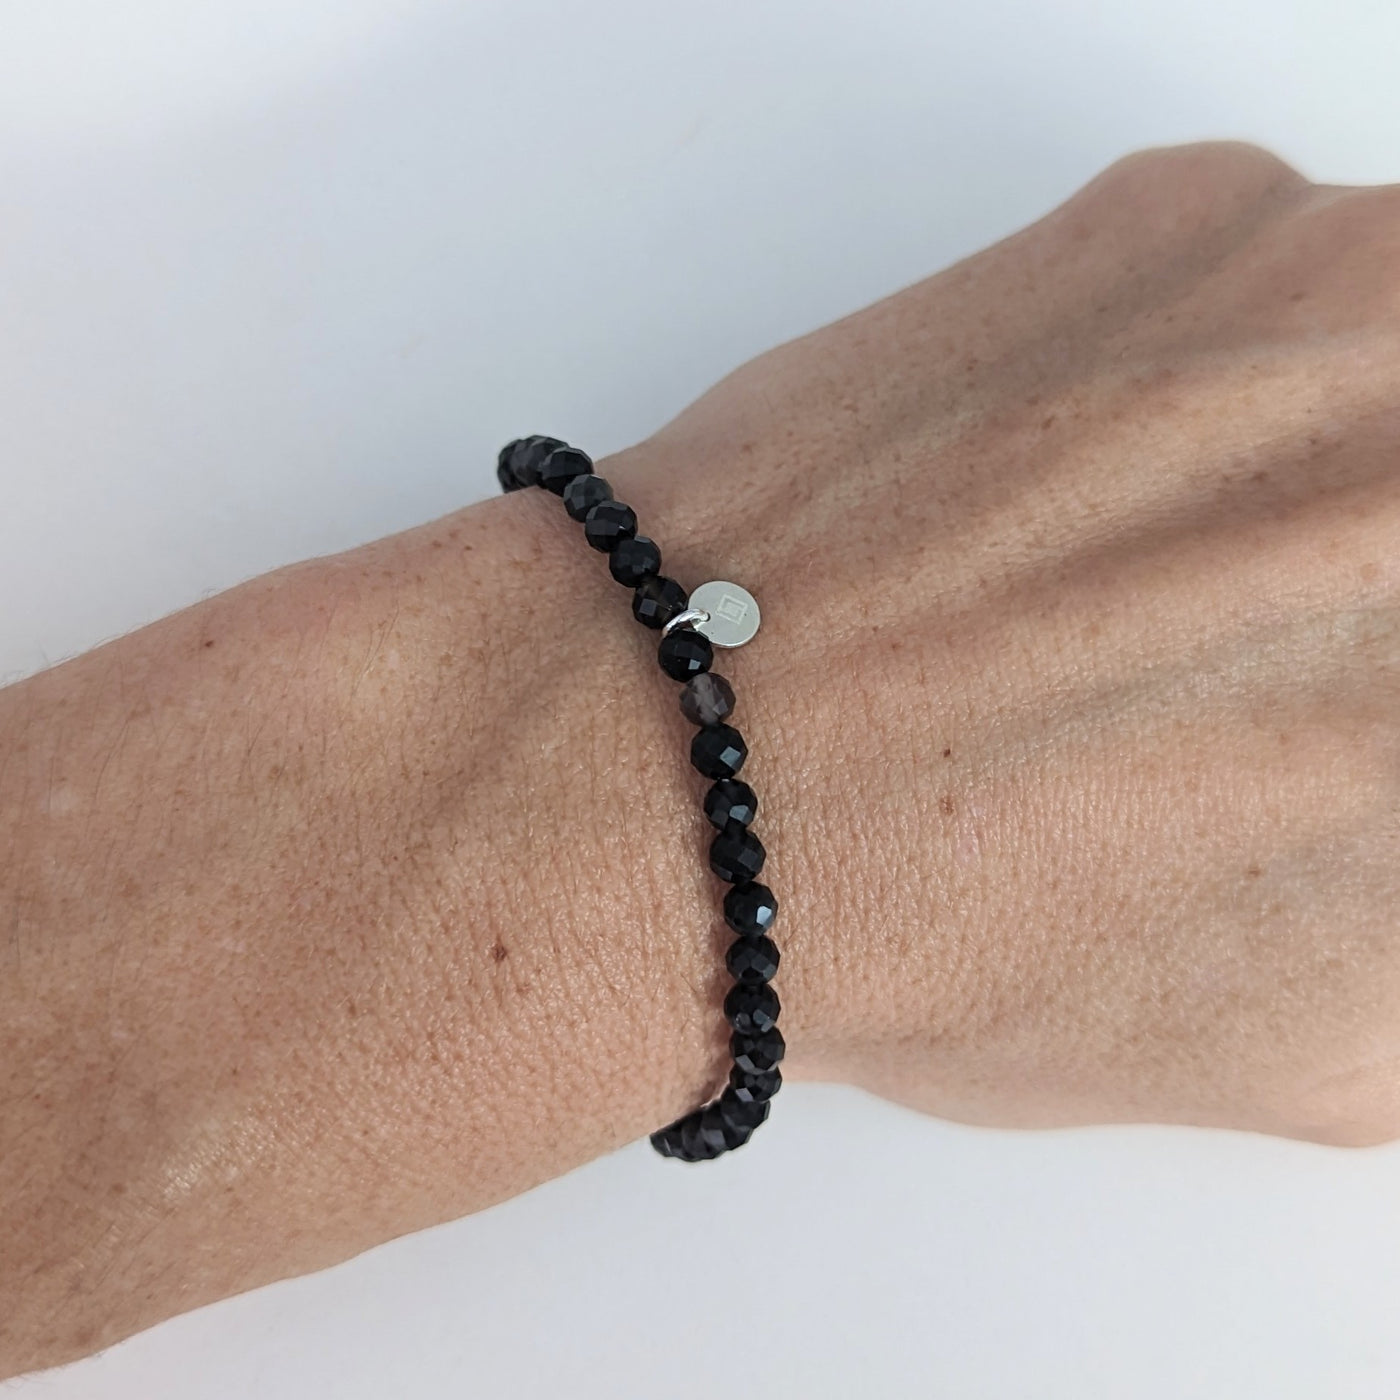 Obsidian 4mm faceted gemstone bracelet with sterling silver circular disc